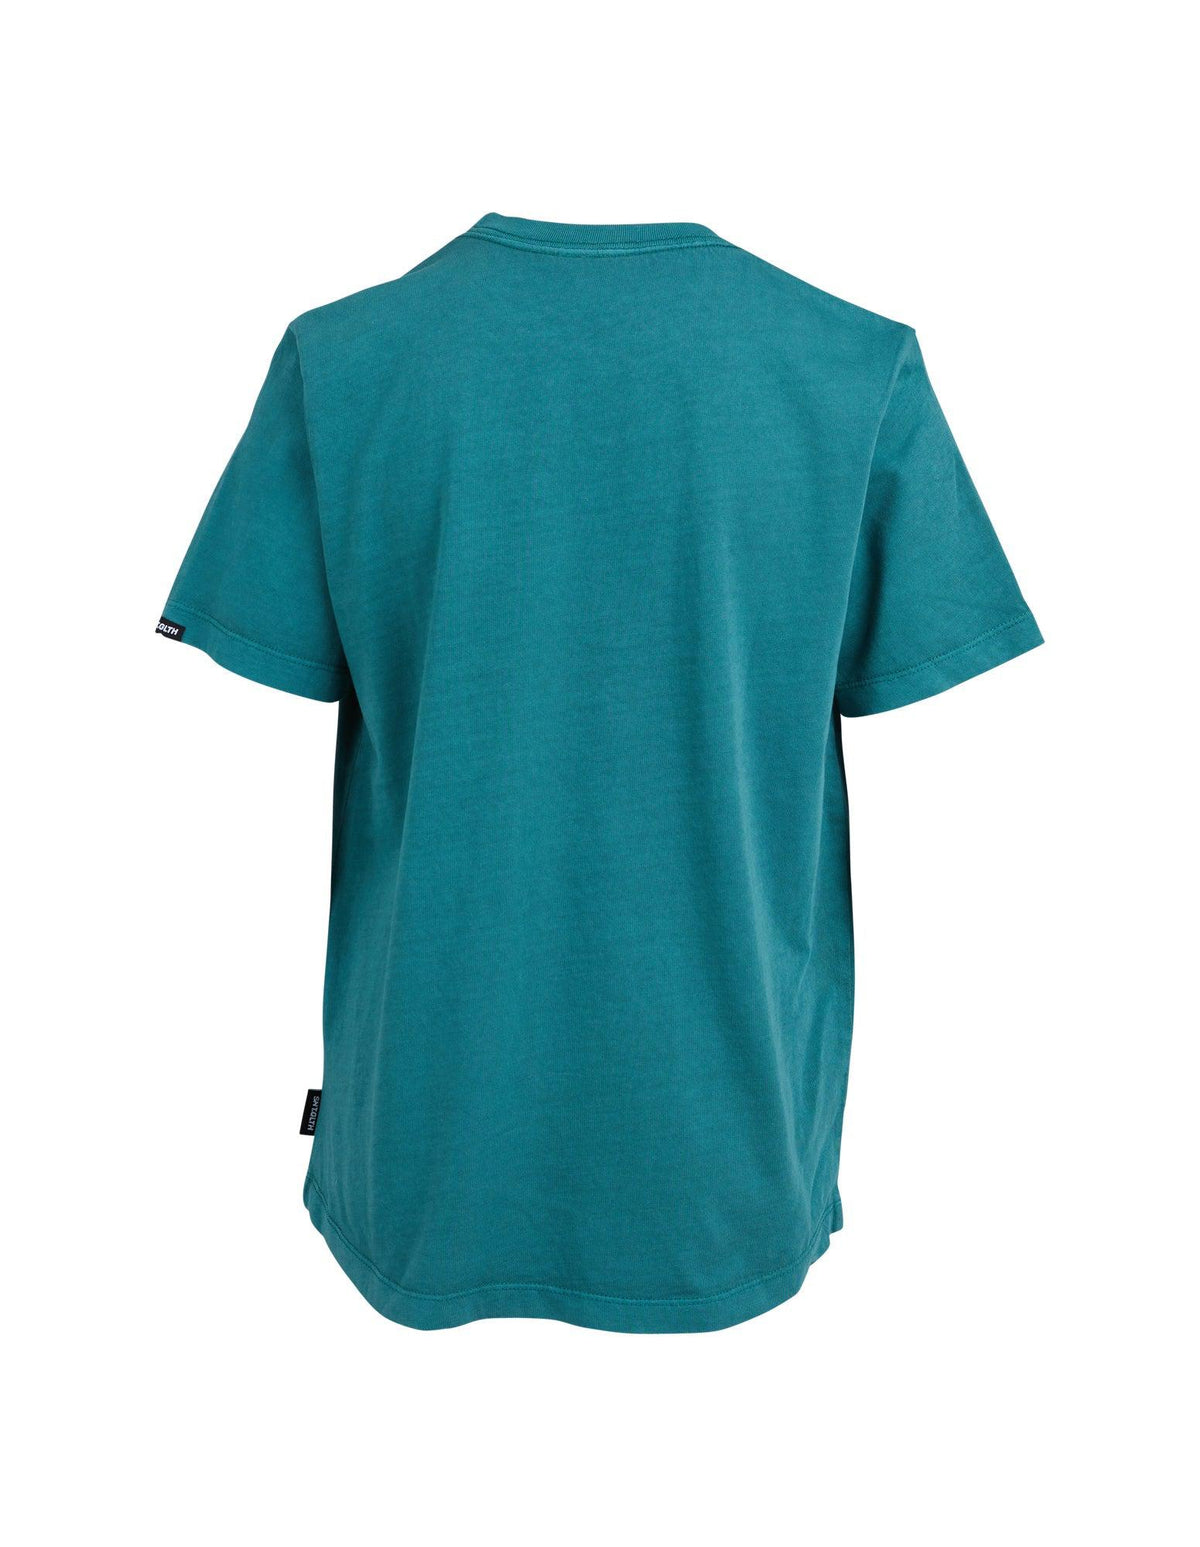 St Goliath 8-16-Kids Pitch Tee Green-Edge Clothing